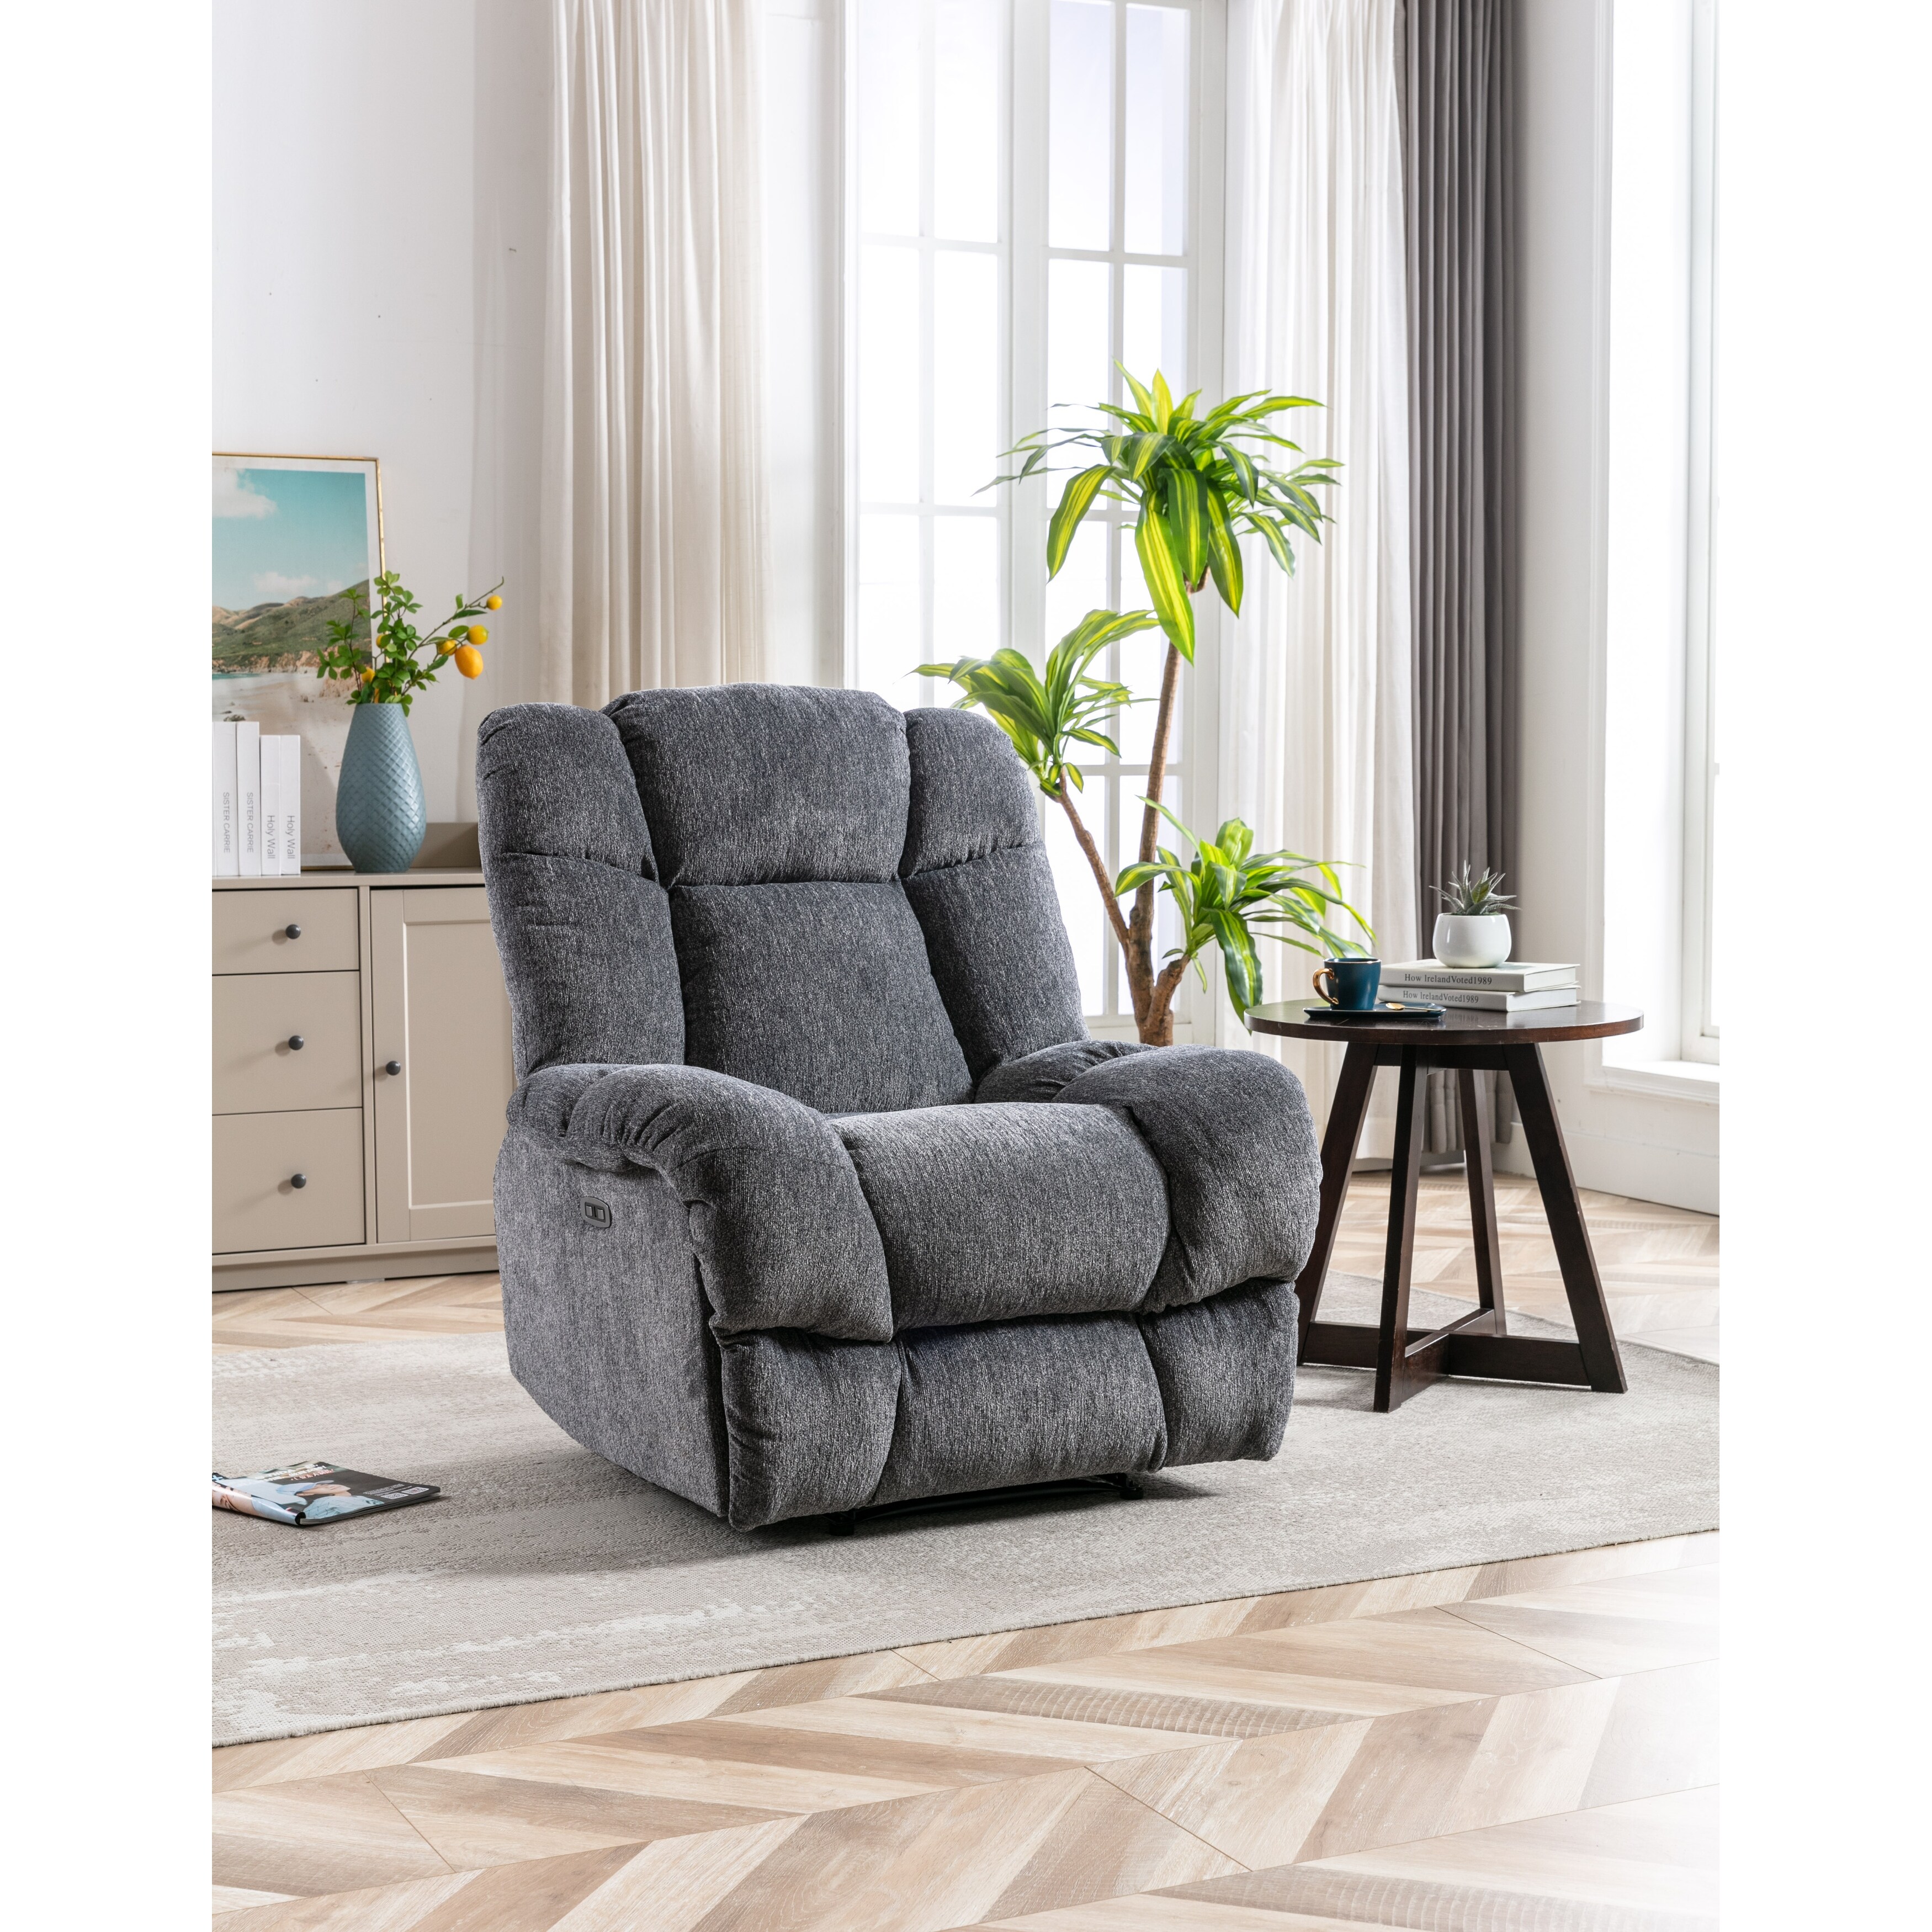 https://ak1.ostkcdn.com/images/products/is/images/direct/7640c5ae26dfb389be4508ff4ccd55fdbb8cd018/Comfortable-Power-Recliner-Linen-Fabric-Theater-Seating-with-USB-Charge-Port-%26-Extra-Large-Leg-Rest-Reclining-Single-Sofa.jpg